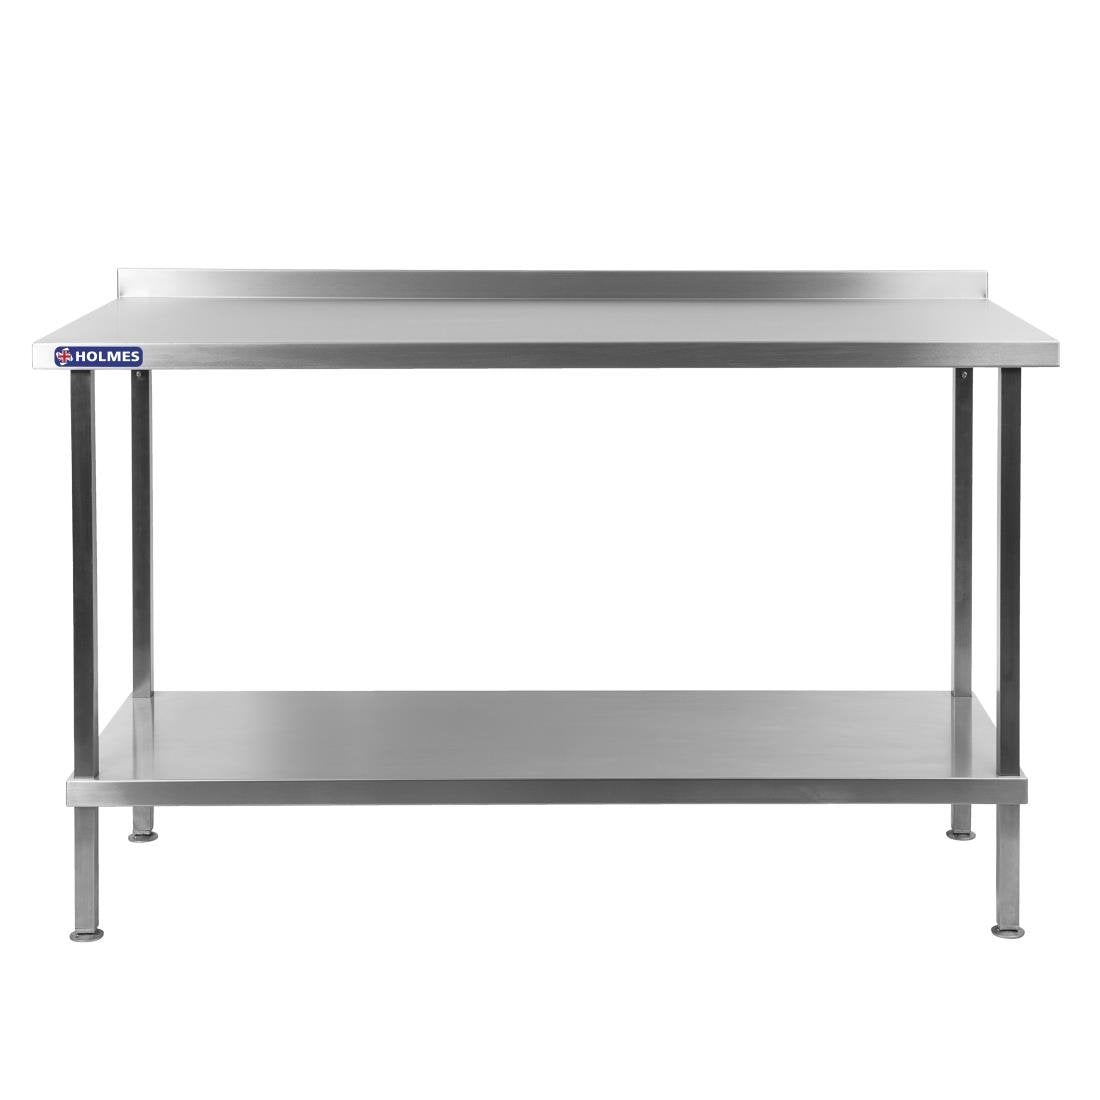 DR035 Holmes Stainless Steel Wall Table 900mm JD Catering Equipment Solutions Ltd